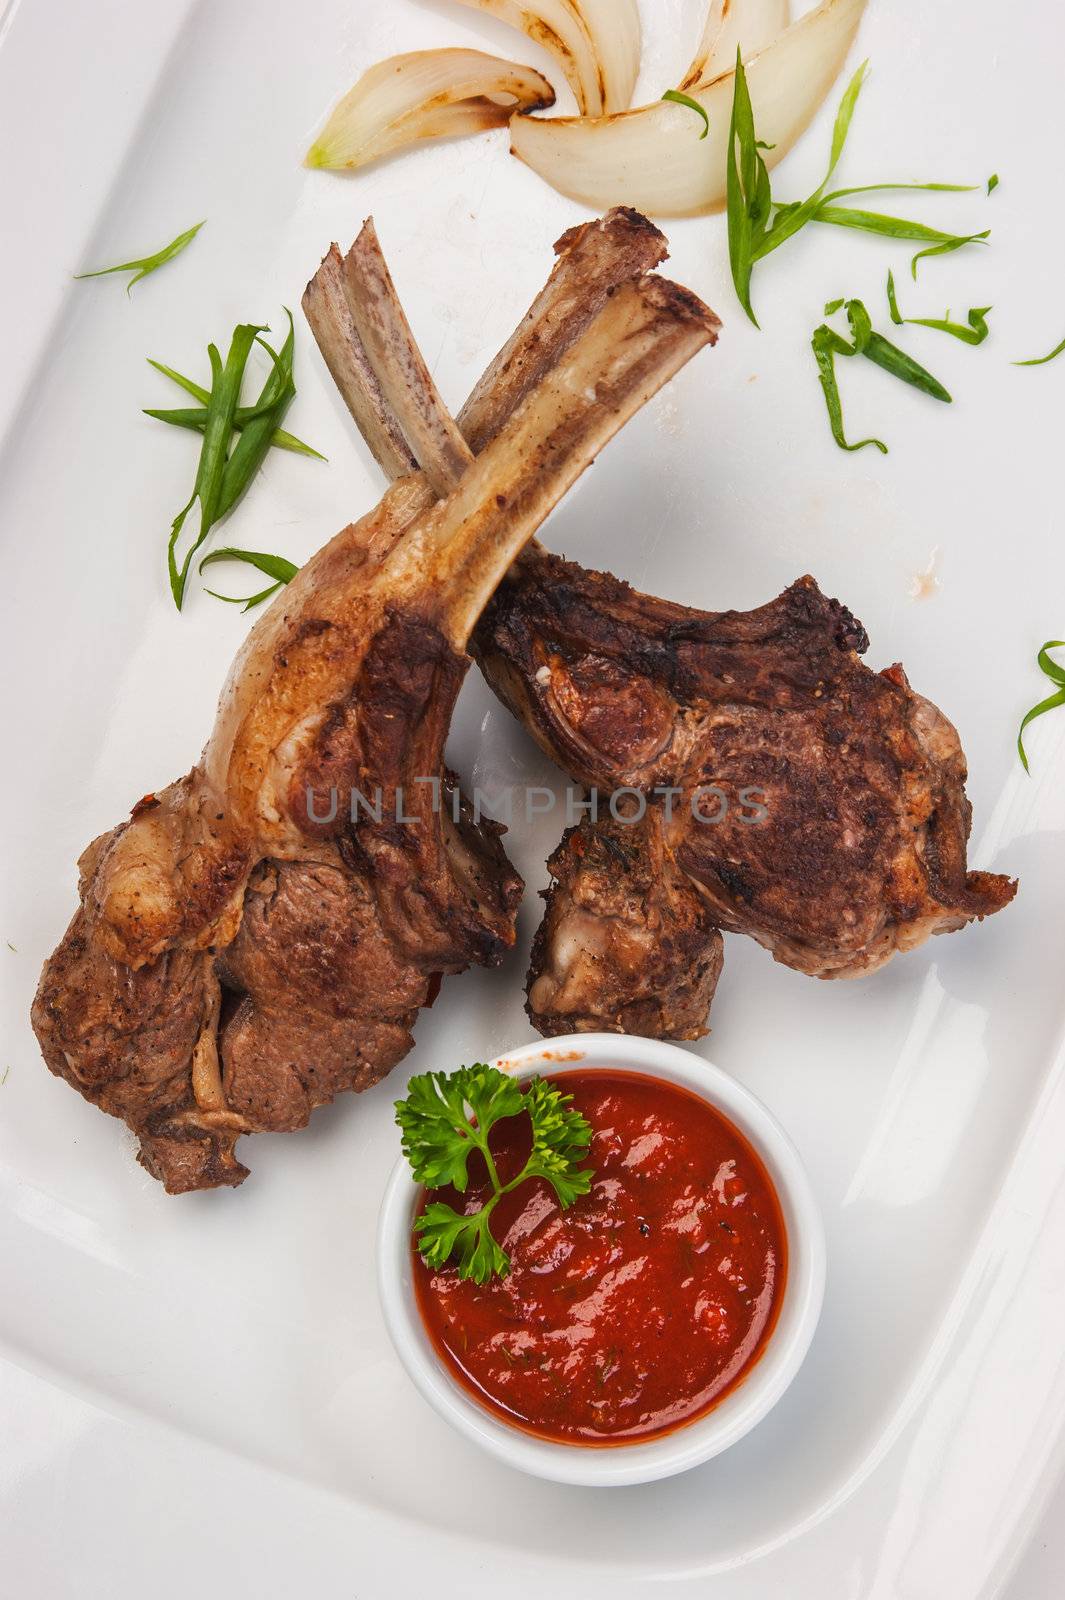 Meat ribs on the plate with tomato sauce